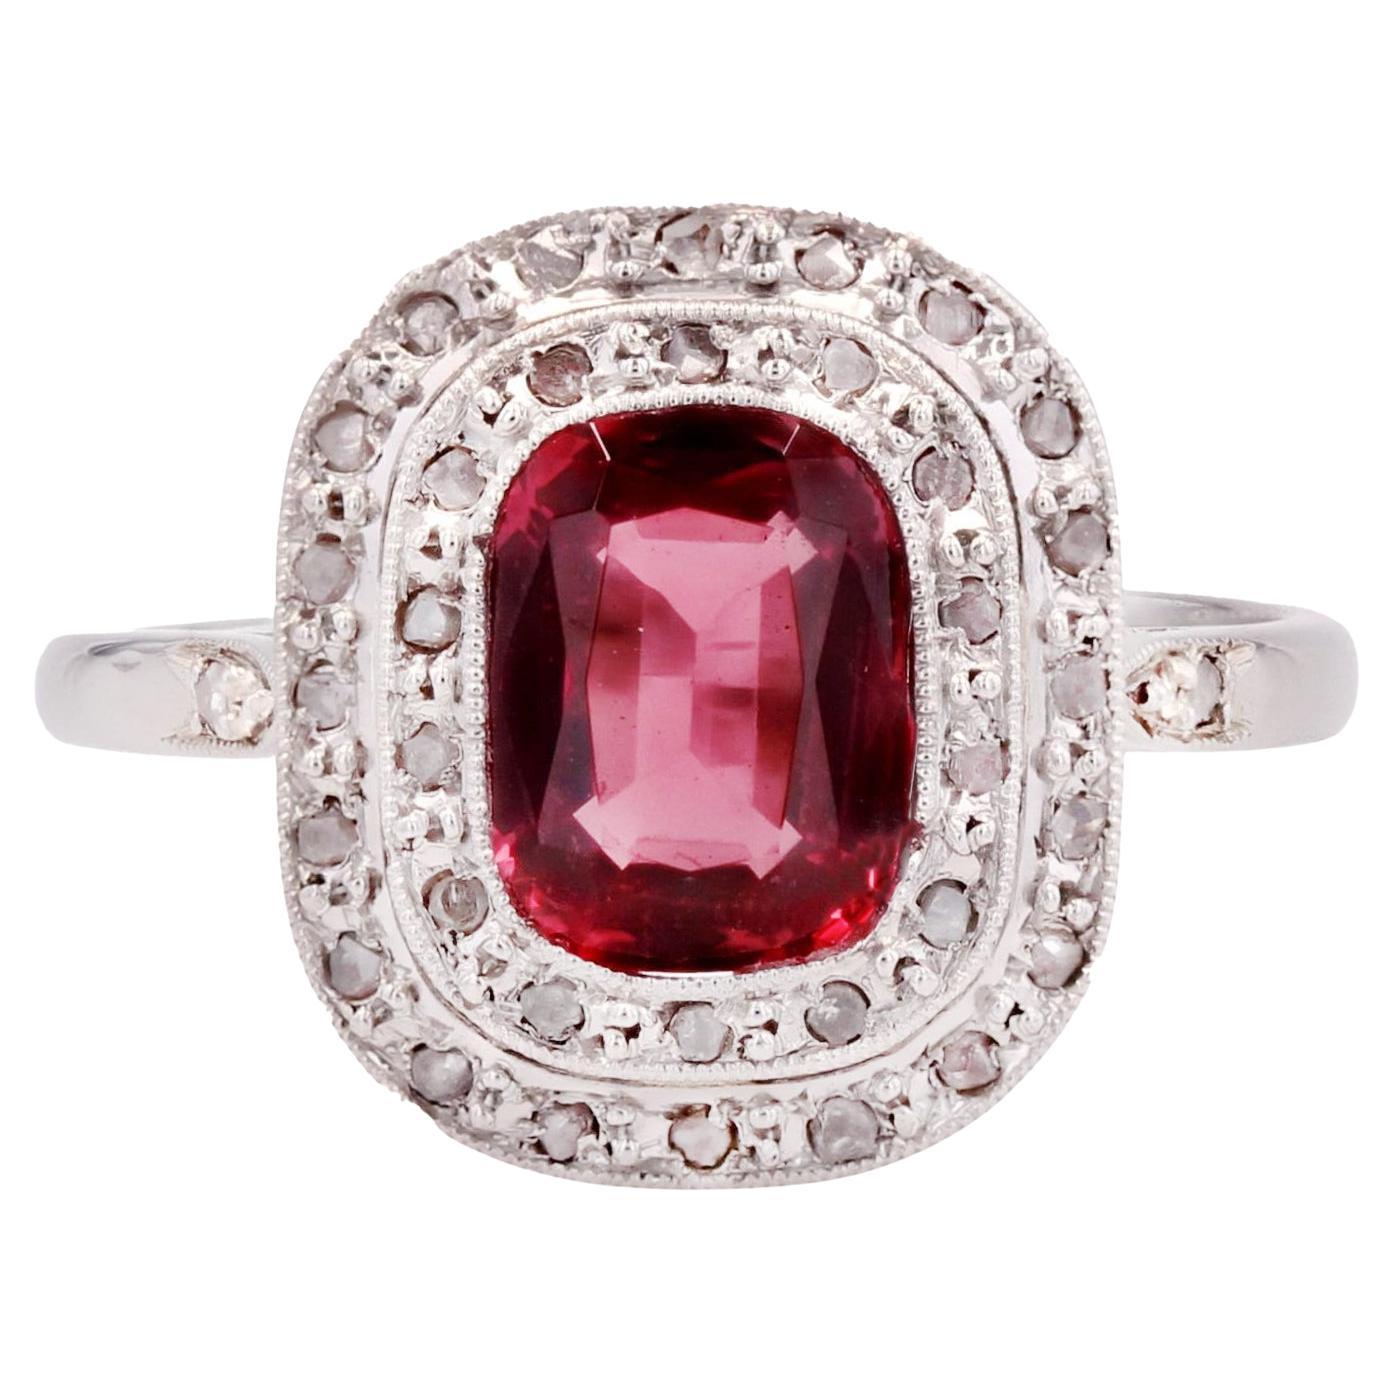 French 1930s 1.20 Carat Red Spinel Diamonds 18 Karat White Gold Ring For Sale